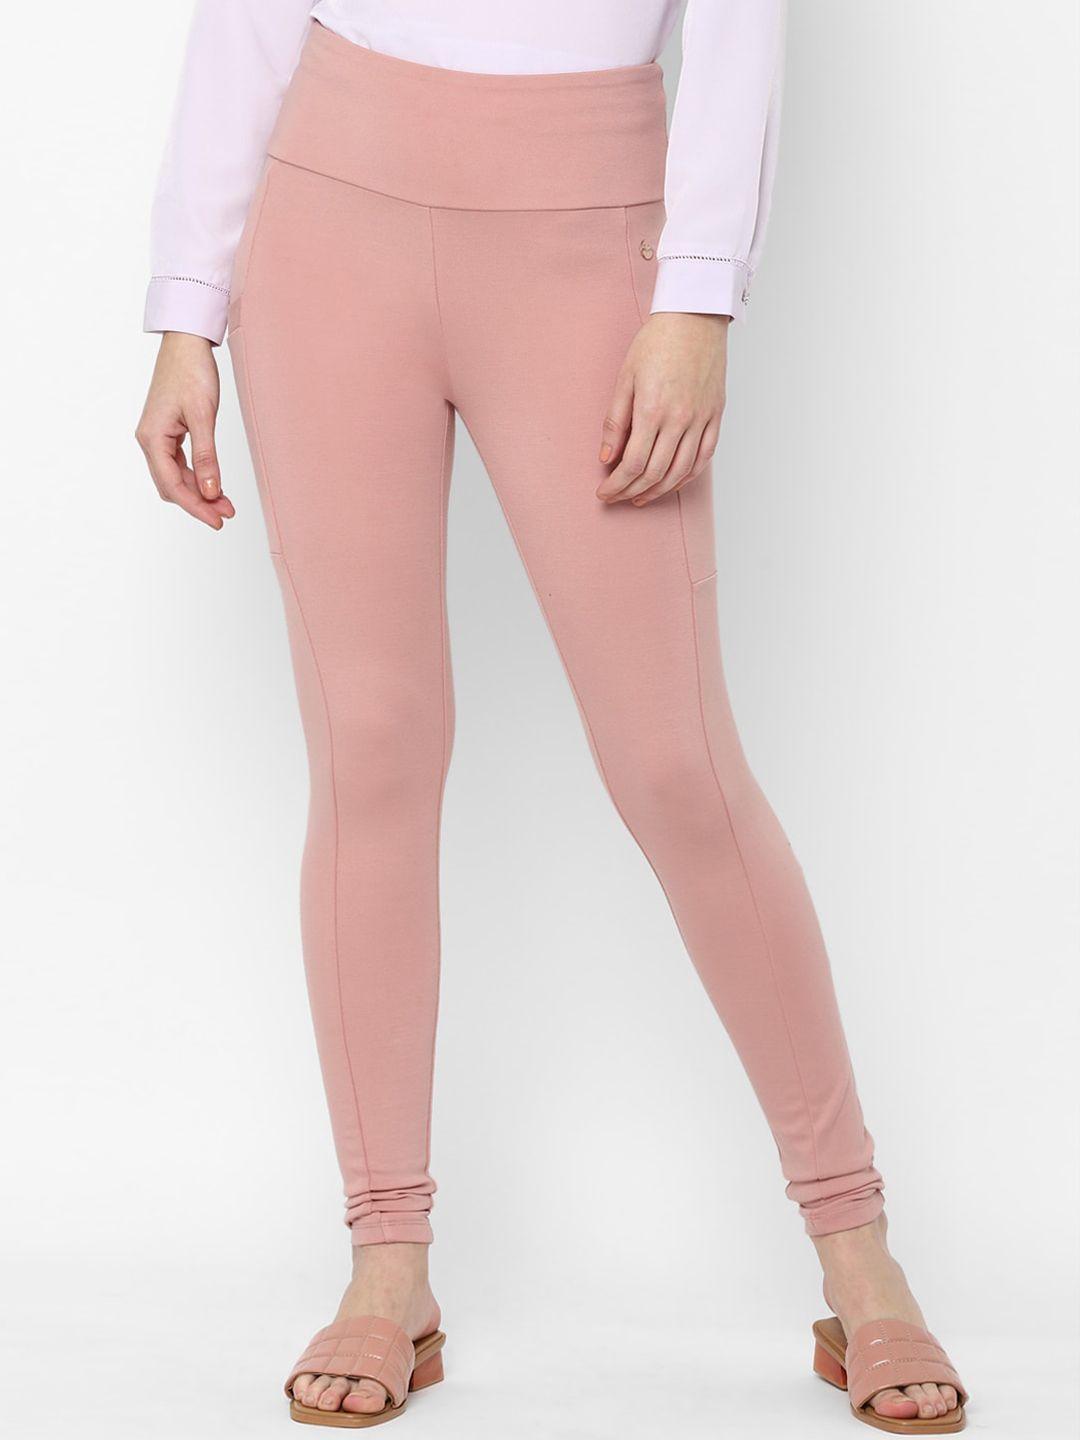 allen solly woman pink solid jeggings